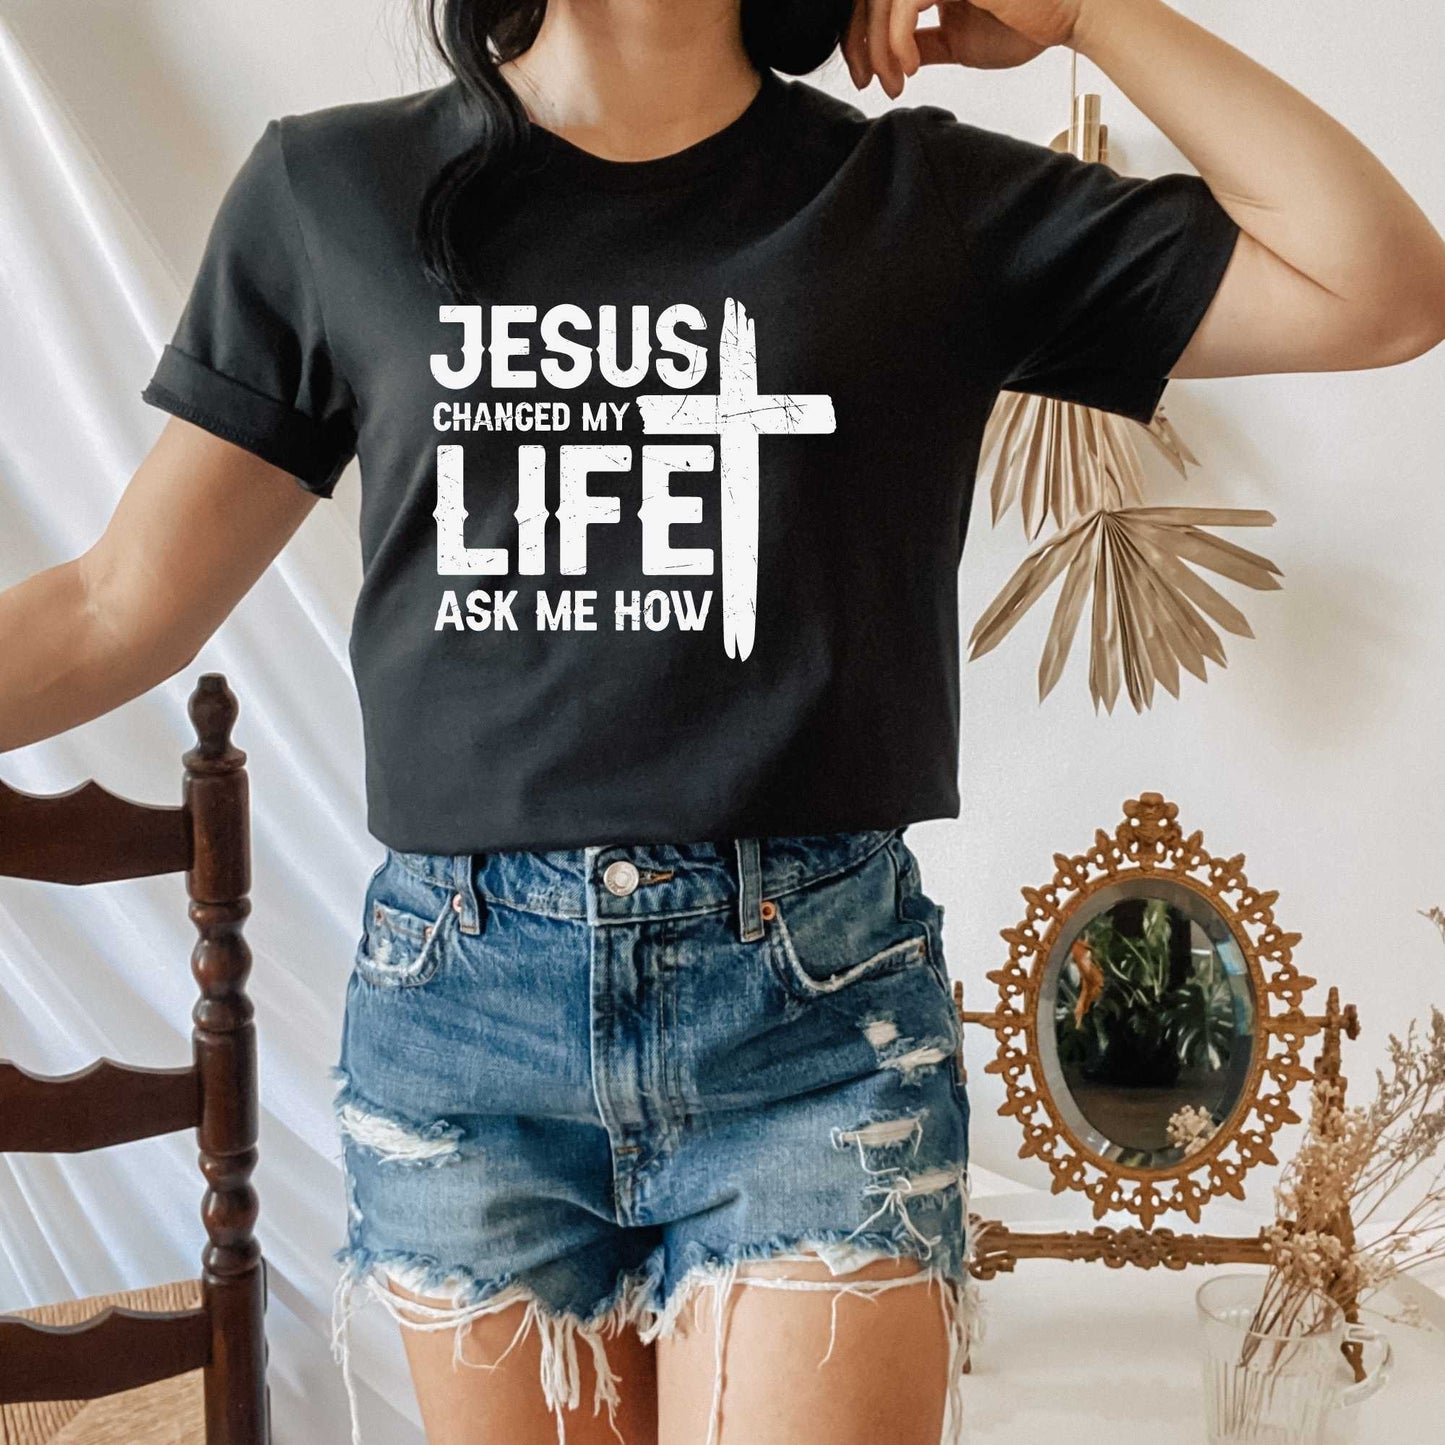 Jesus Saved My Life Ask Me How, Faith tshirts for Women and Men